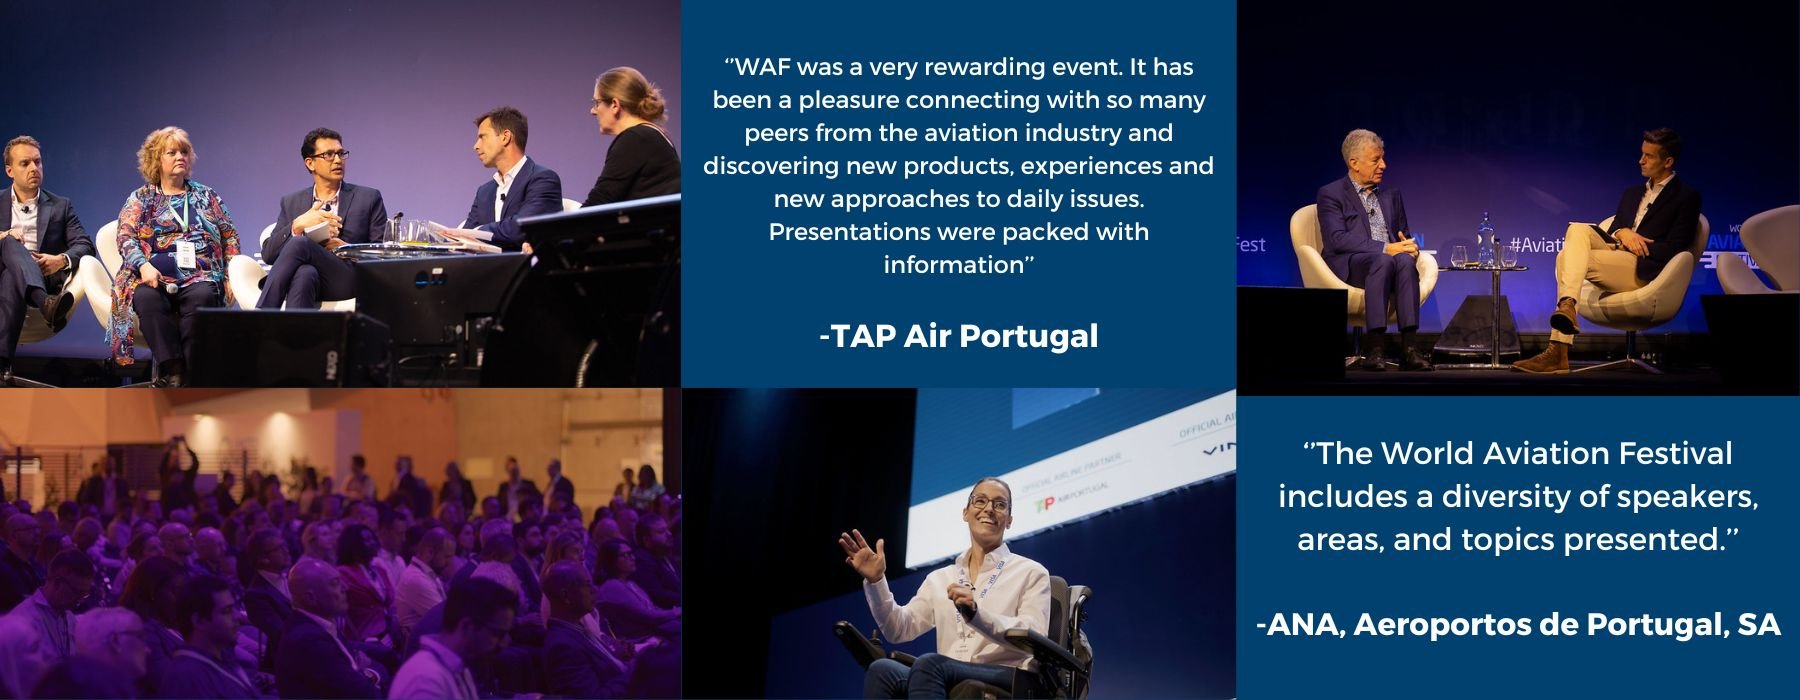 Join the leaders of the world's airlines and airports at World Aviation Festival